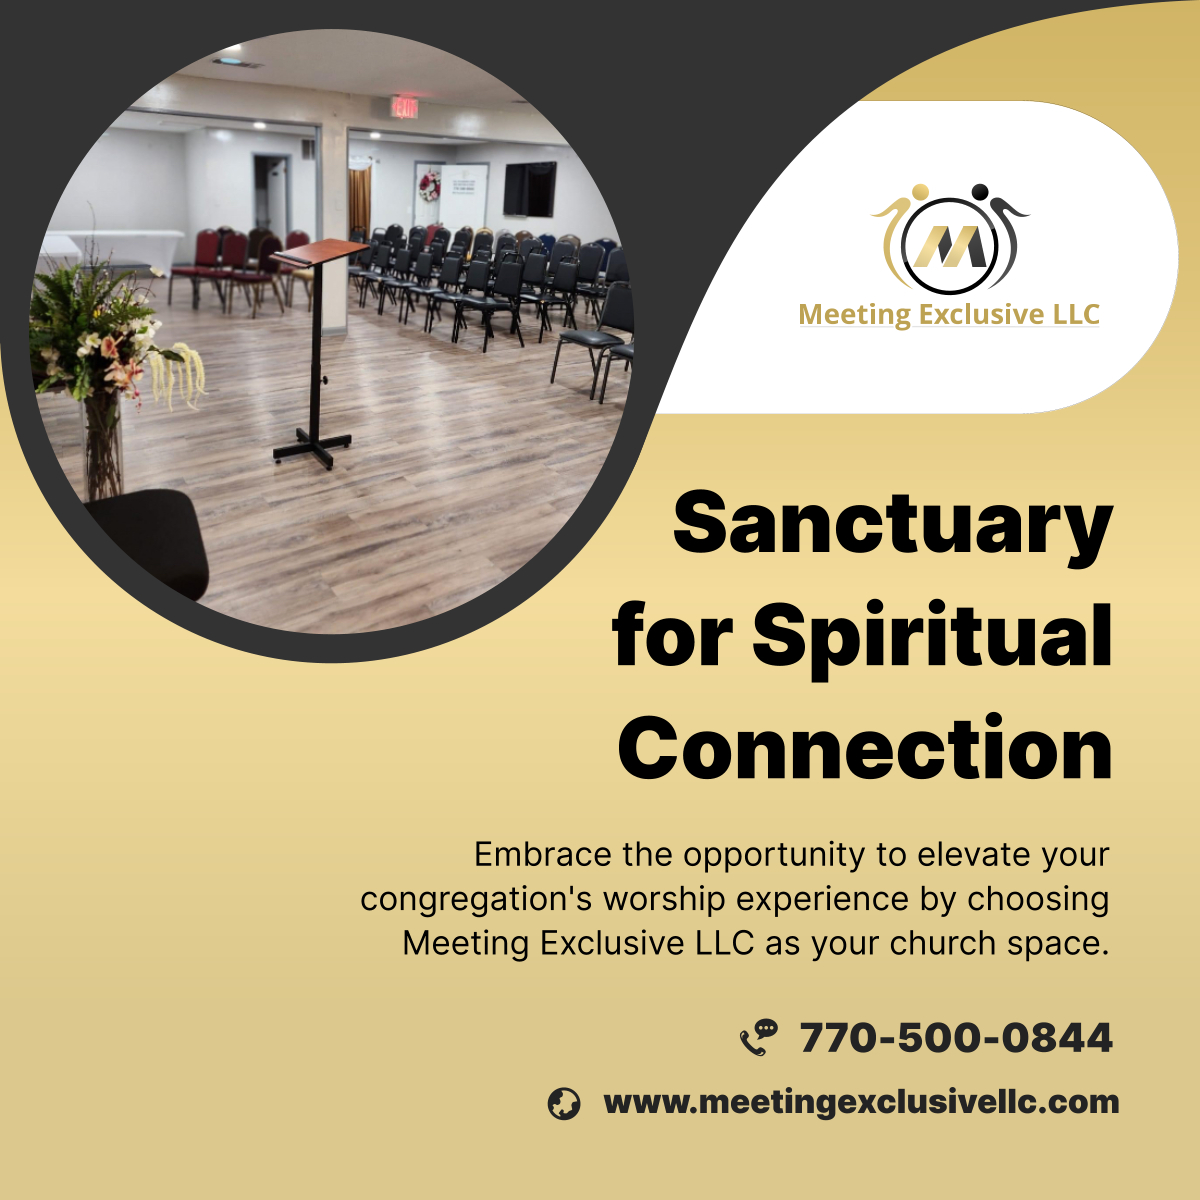 With our adaptable venues and commitment to creating a welcoming atmosphere, we provide the perfect sanctuary for spiritual connection and growth. 

#DouglasvilleGA #Sanctuary #EventsSpace